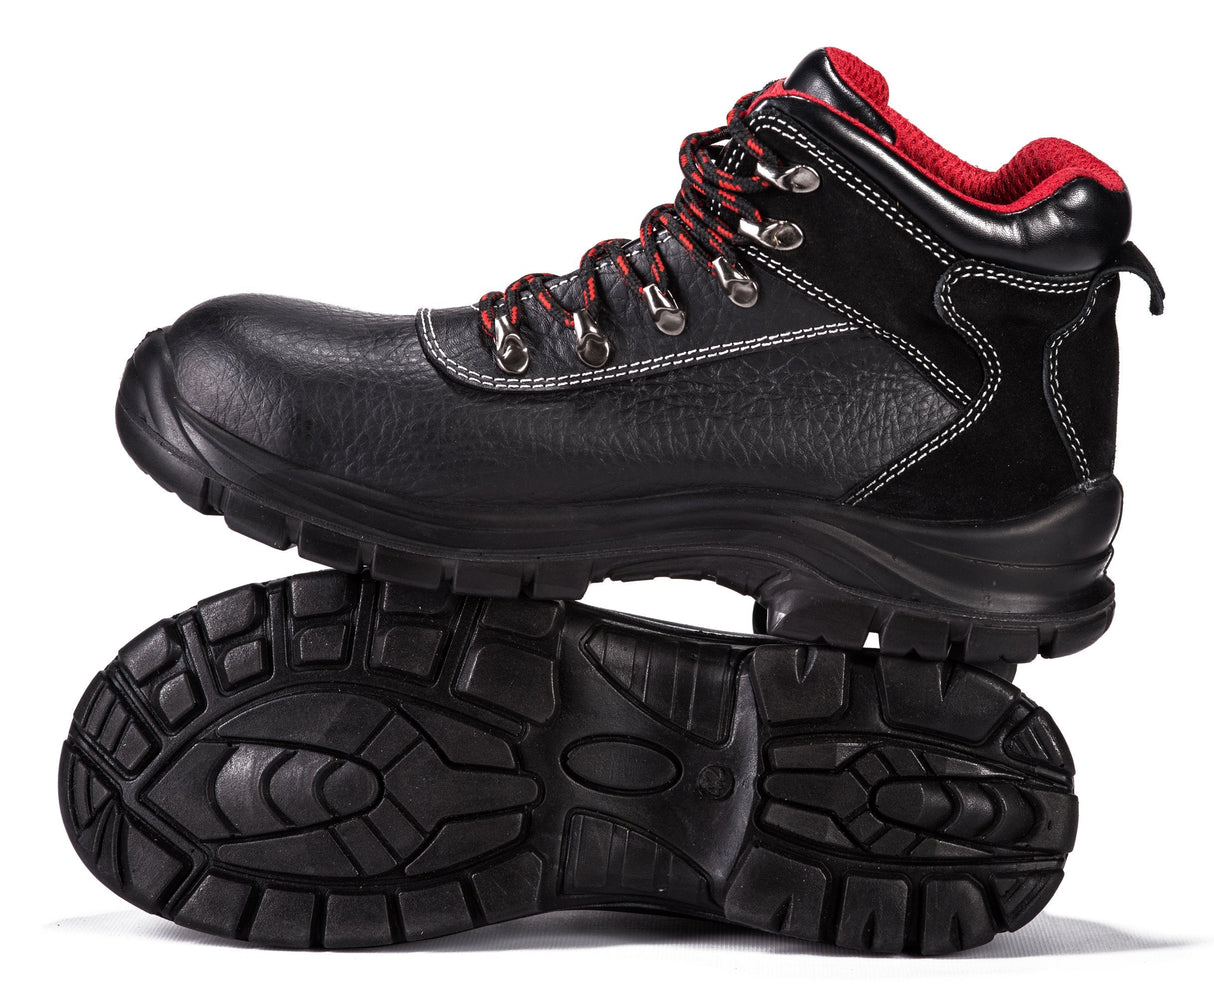 Mens Waterproof Safety Boots With Steel Midsole Wide Fit | Steel Toe Cap Work Shoes 7777